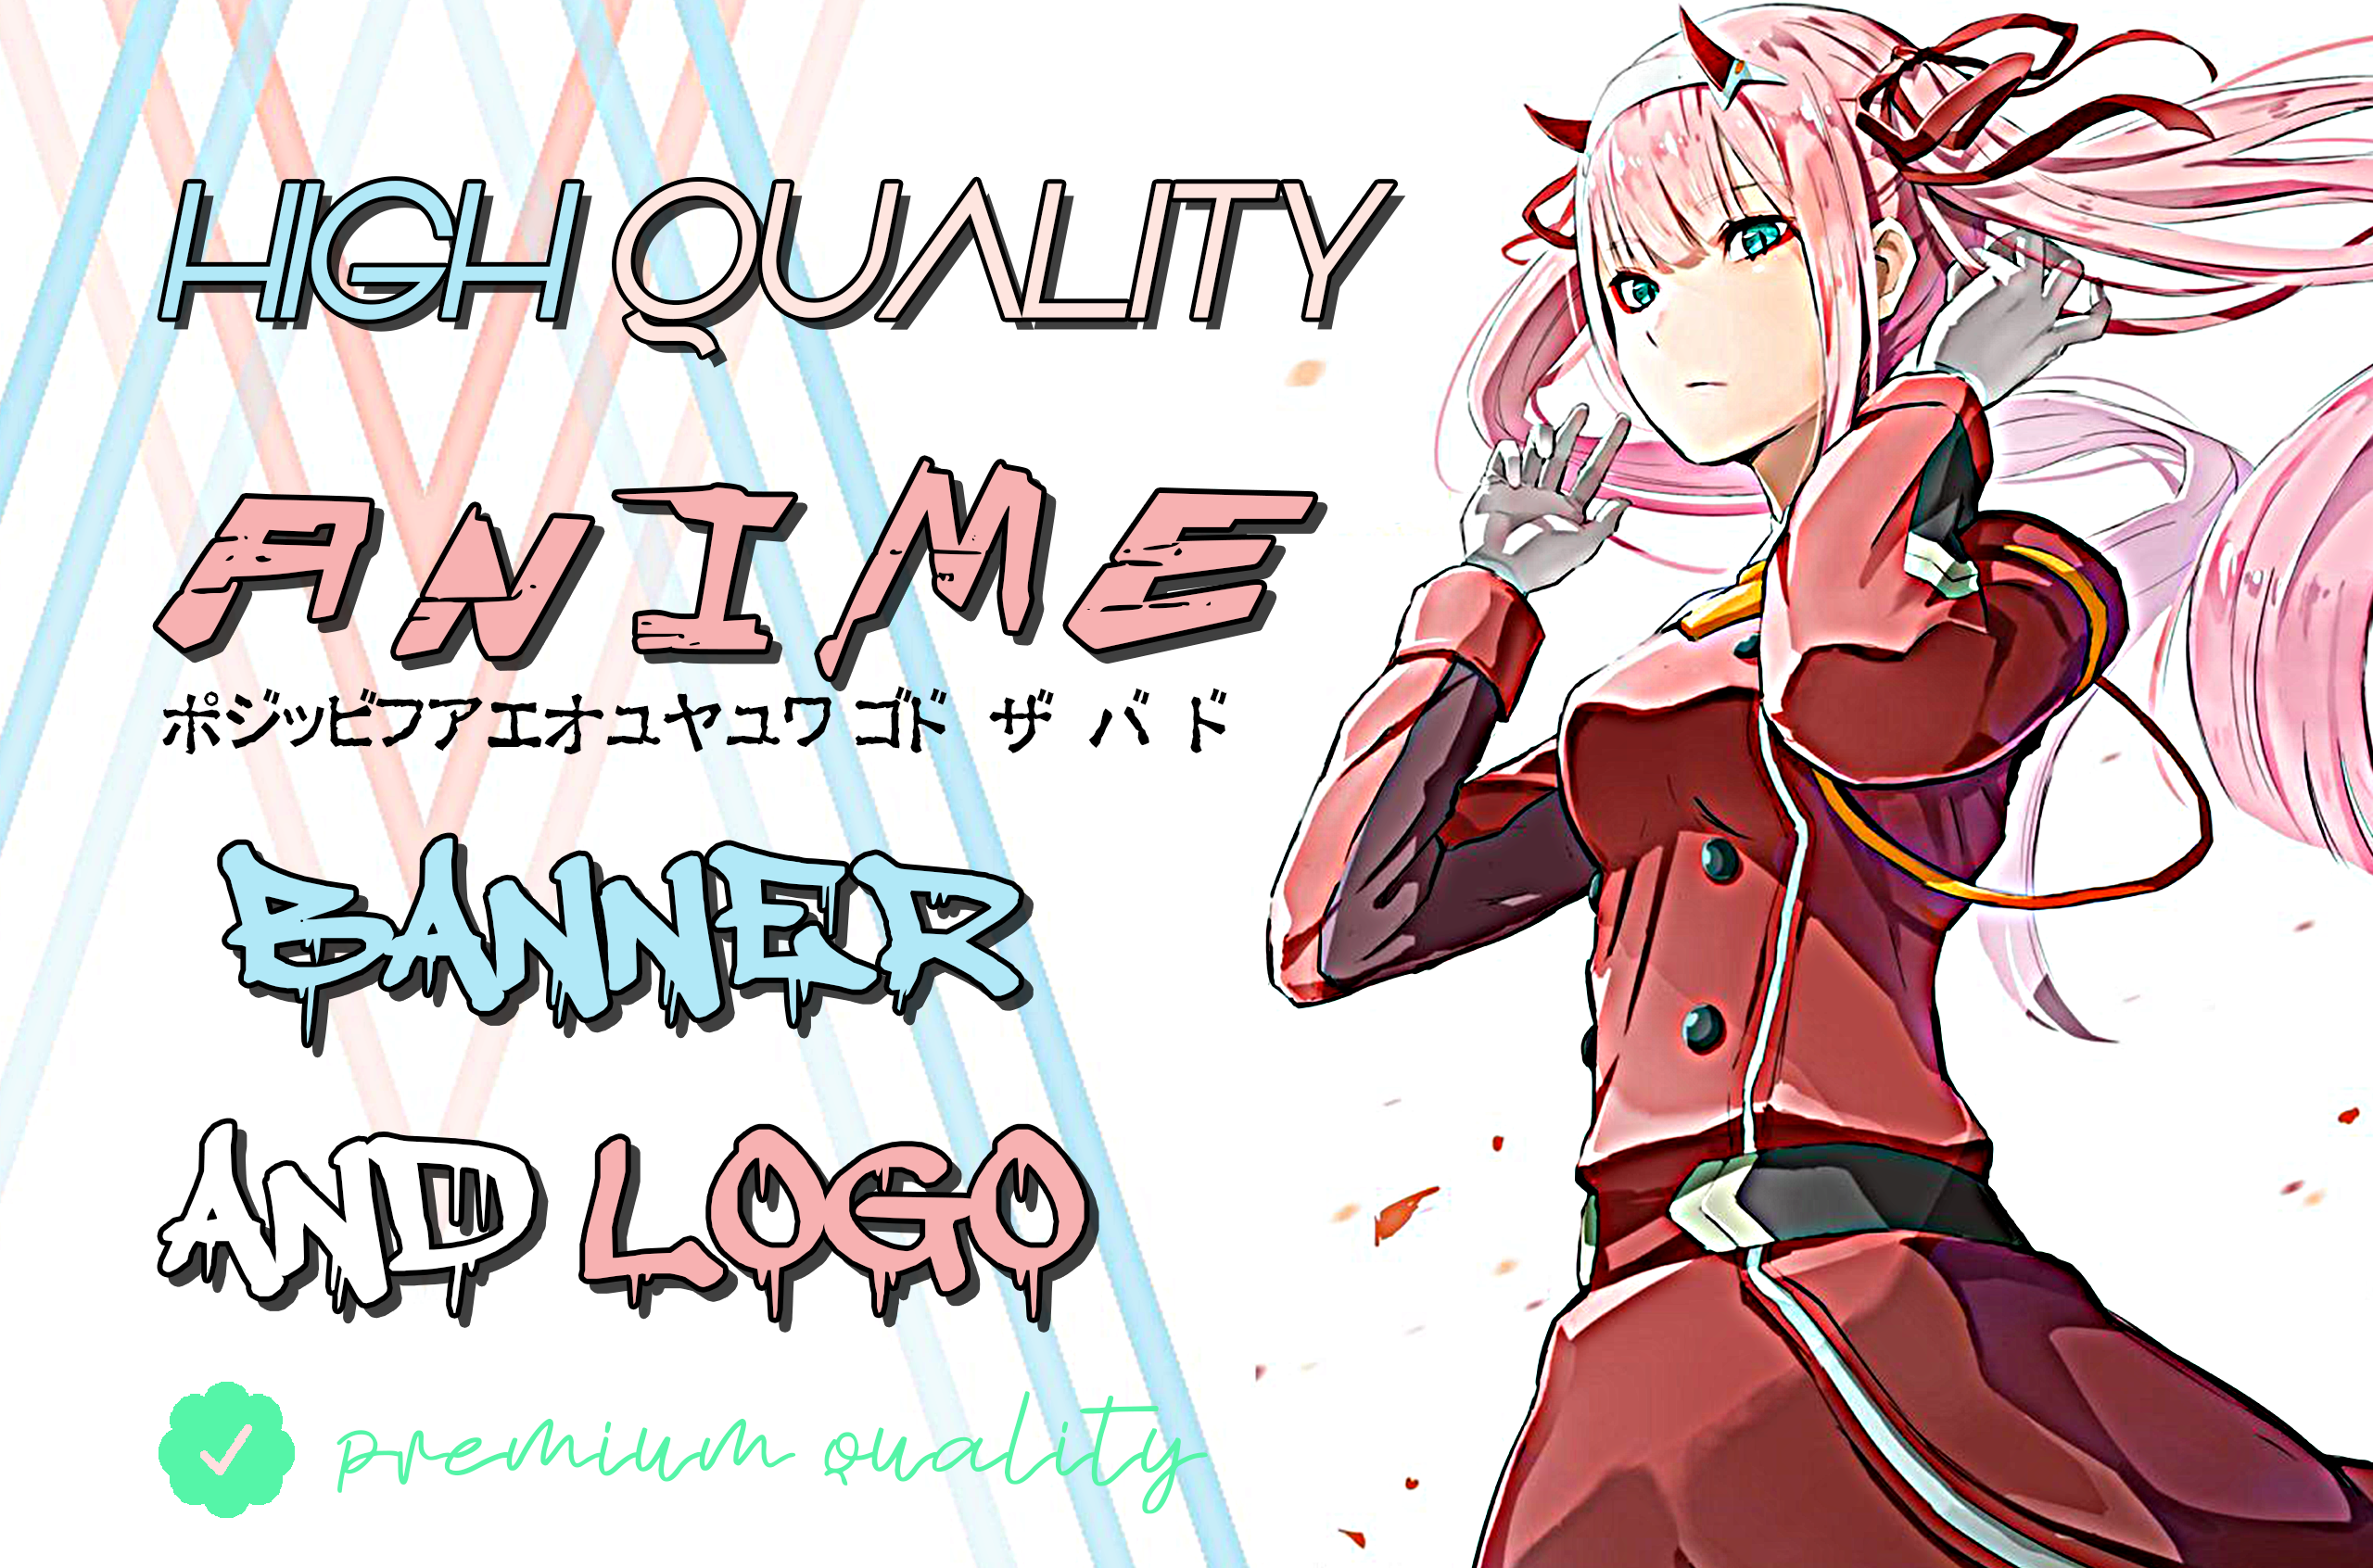 Custom Anime Header / Banner for Twitch and Discord - Etsy